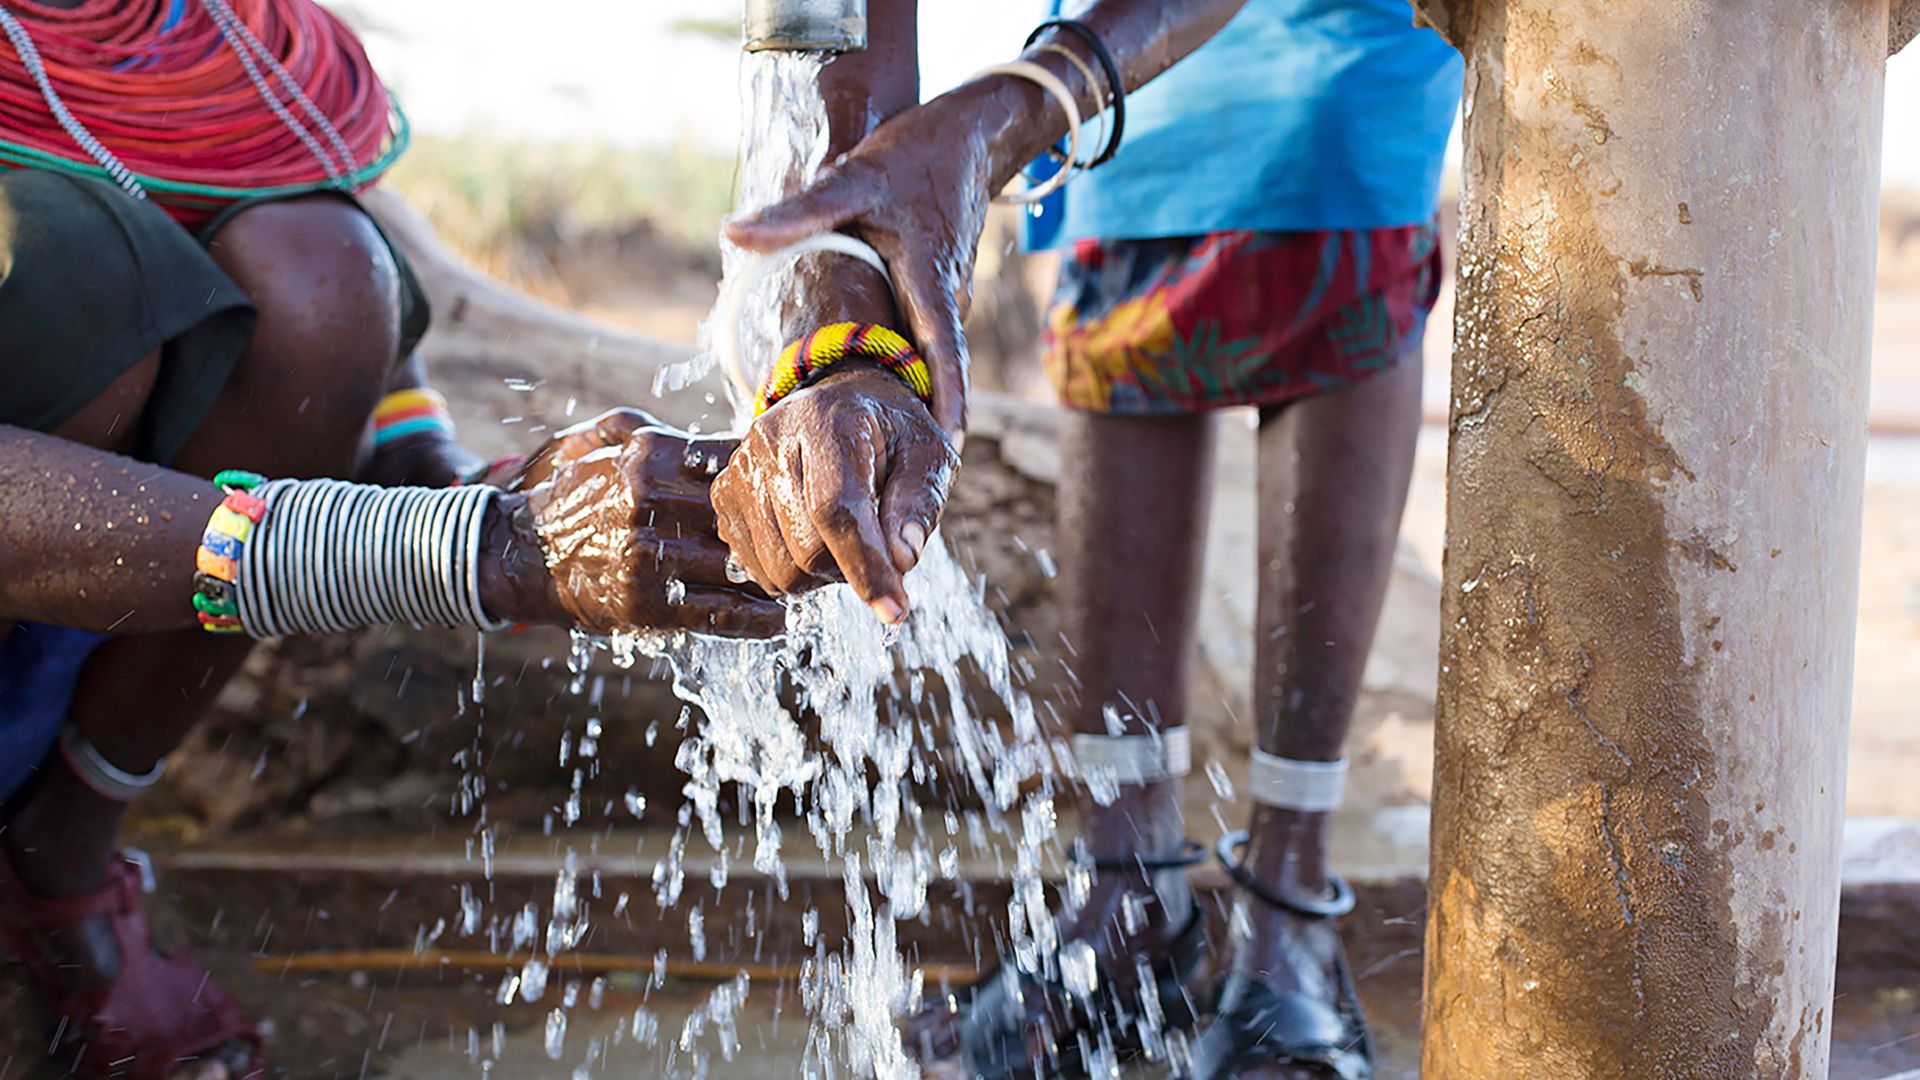 Detail of African hands washing their hands